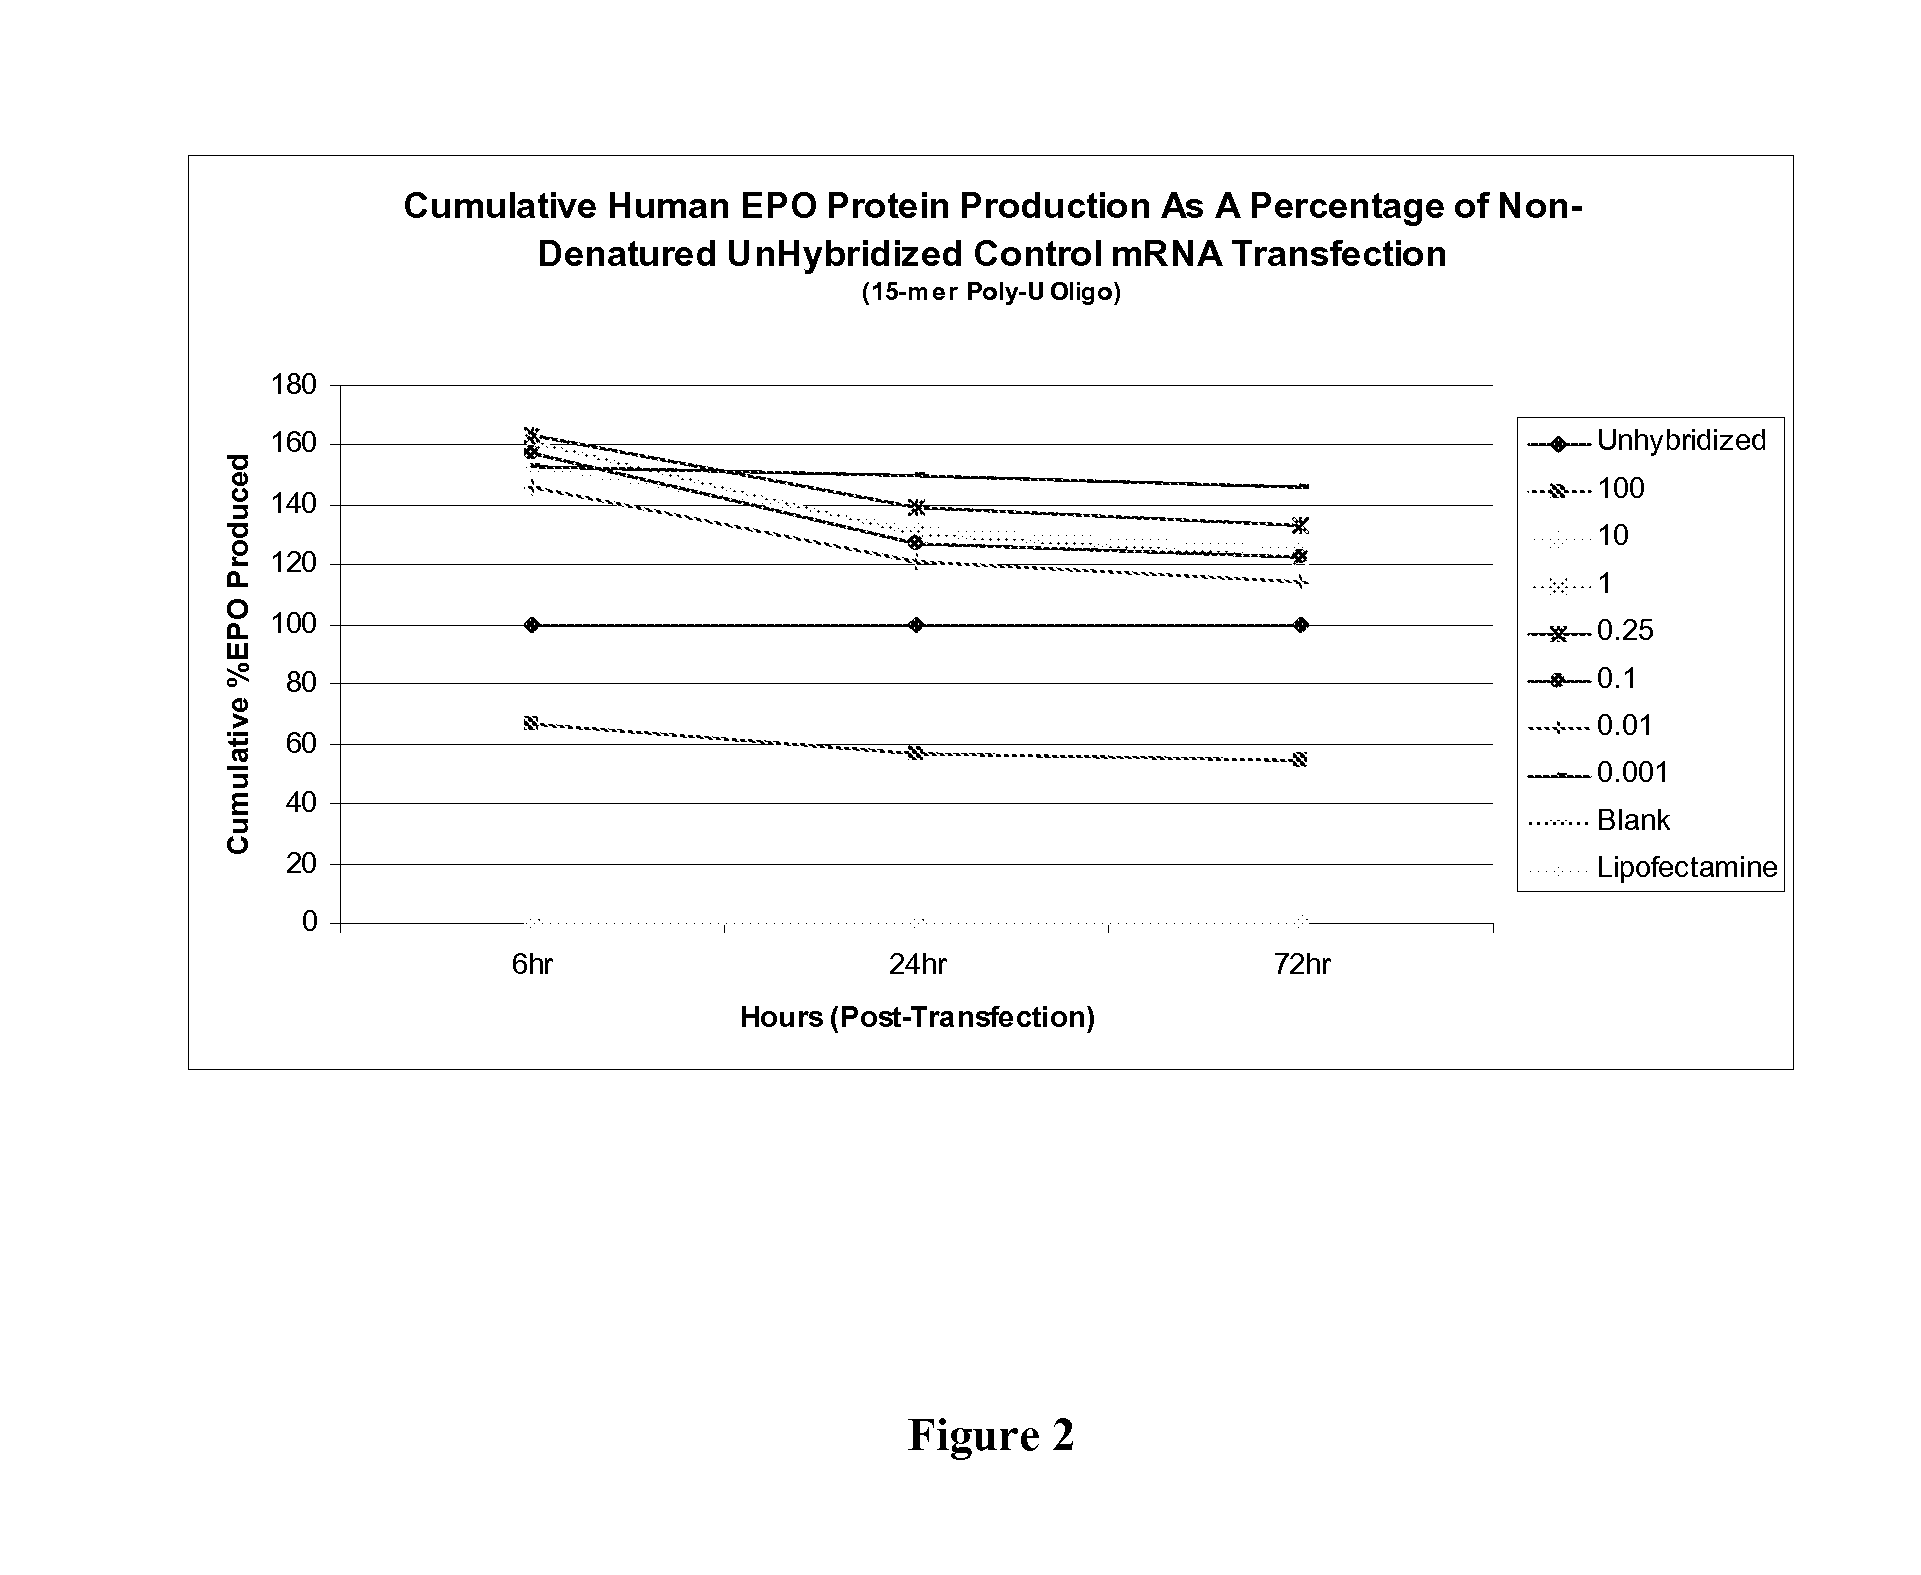 Nuclease resistant polynucleotides and uses thereof